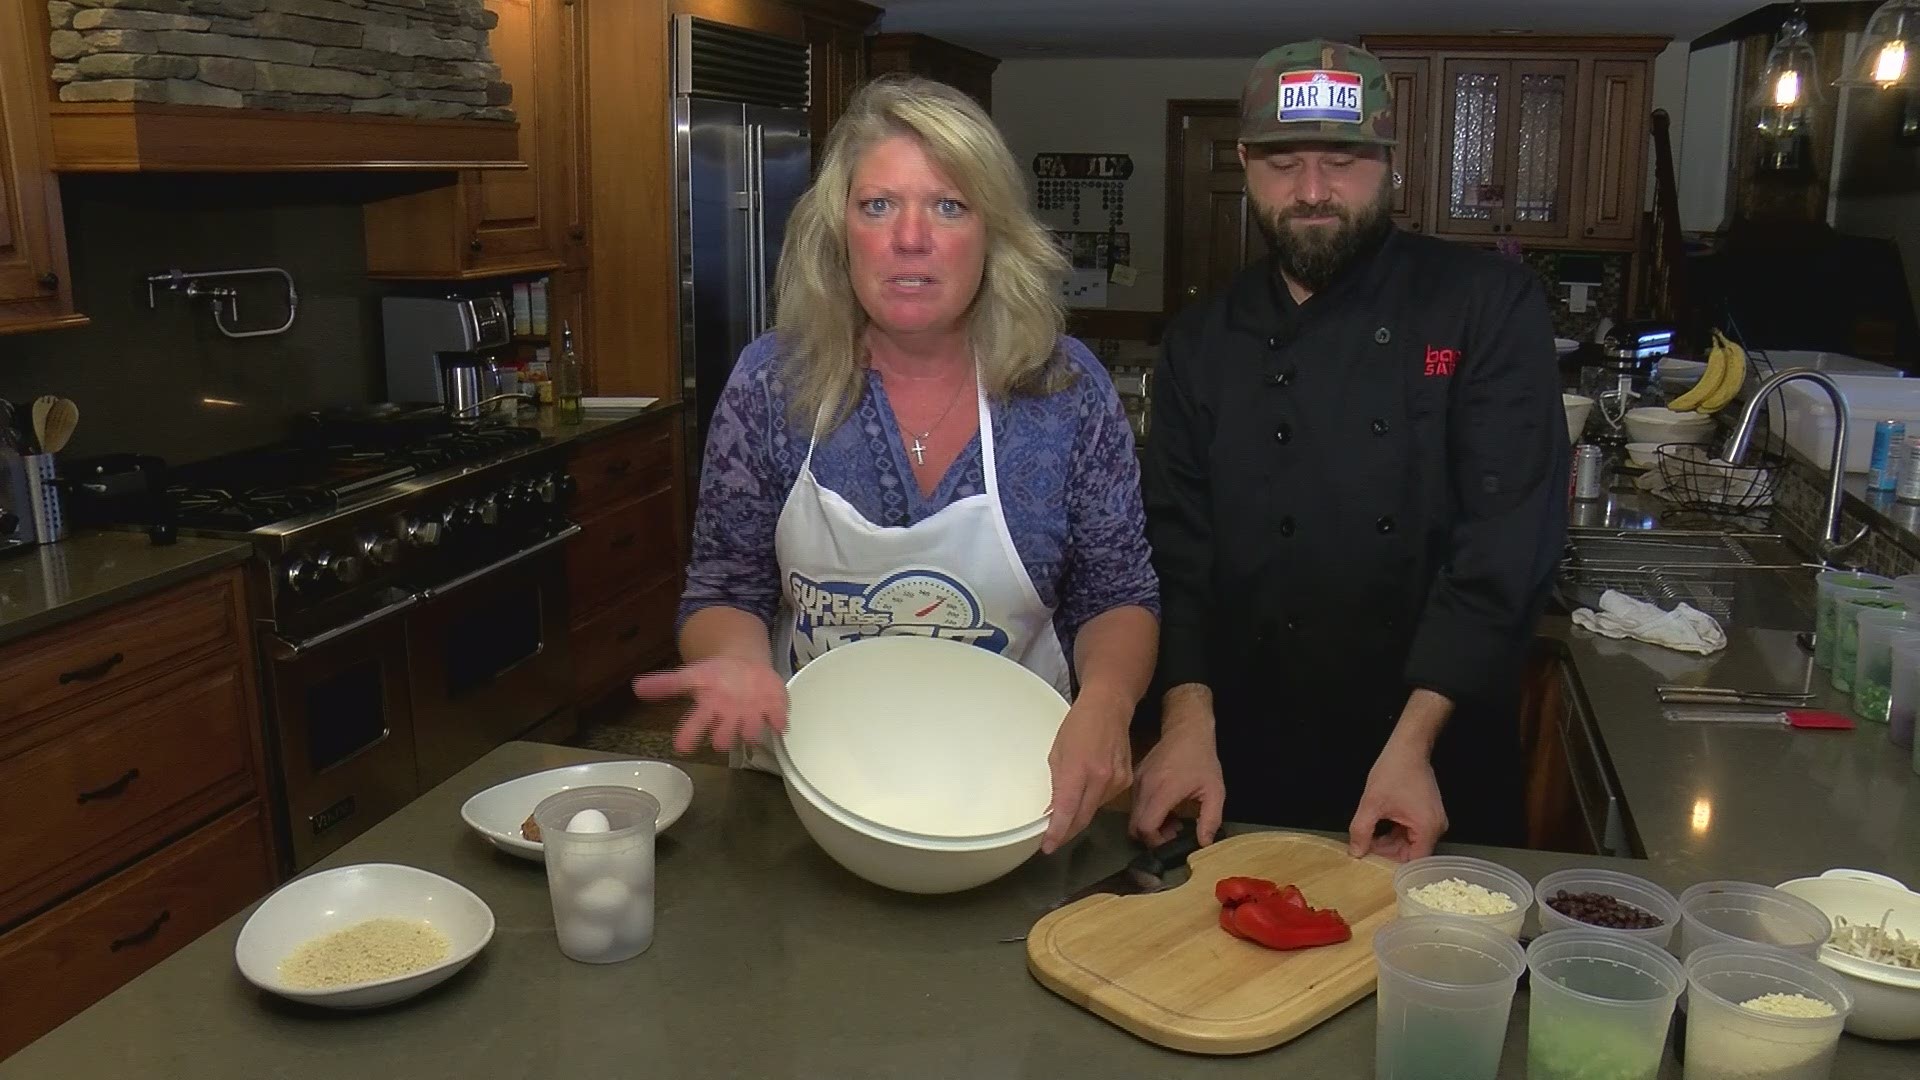 What's for supper? Veggie Burgers - but don't be intimidated, Kelly and Brandon from Bar 145 have an easy recipe for a healthy, veggie based meal!